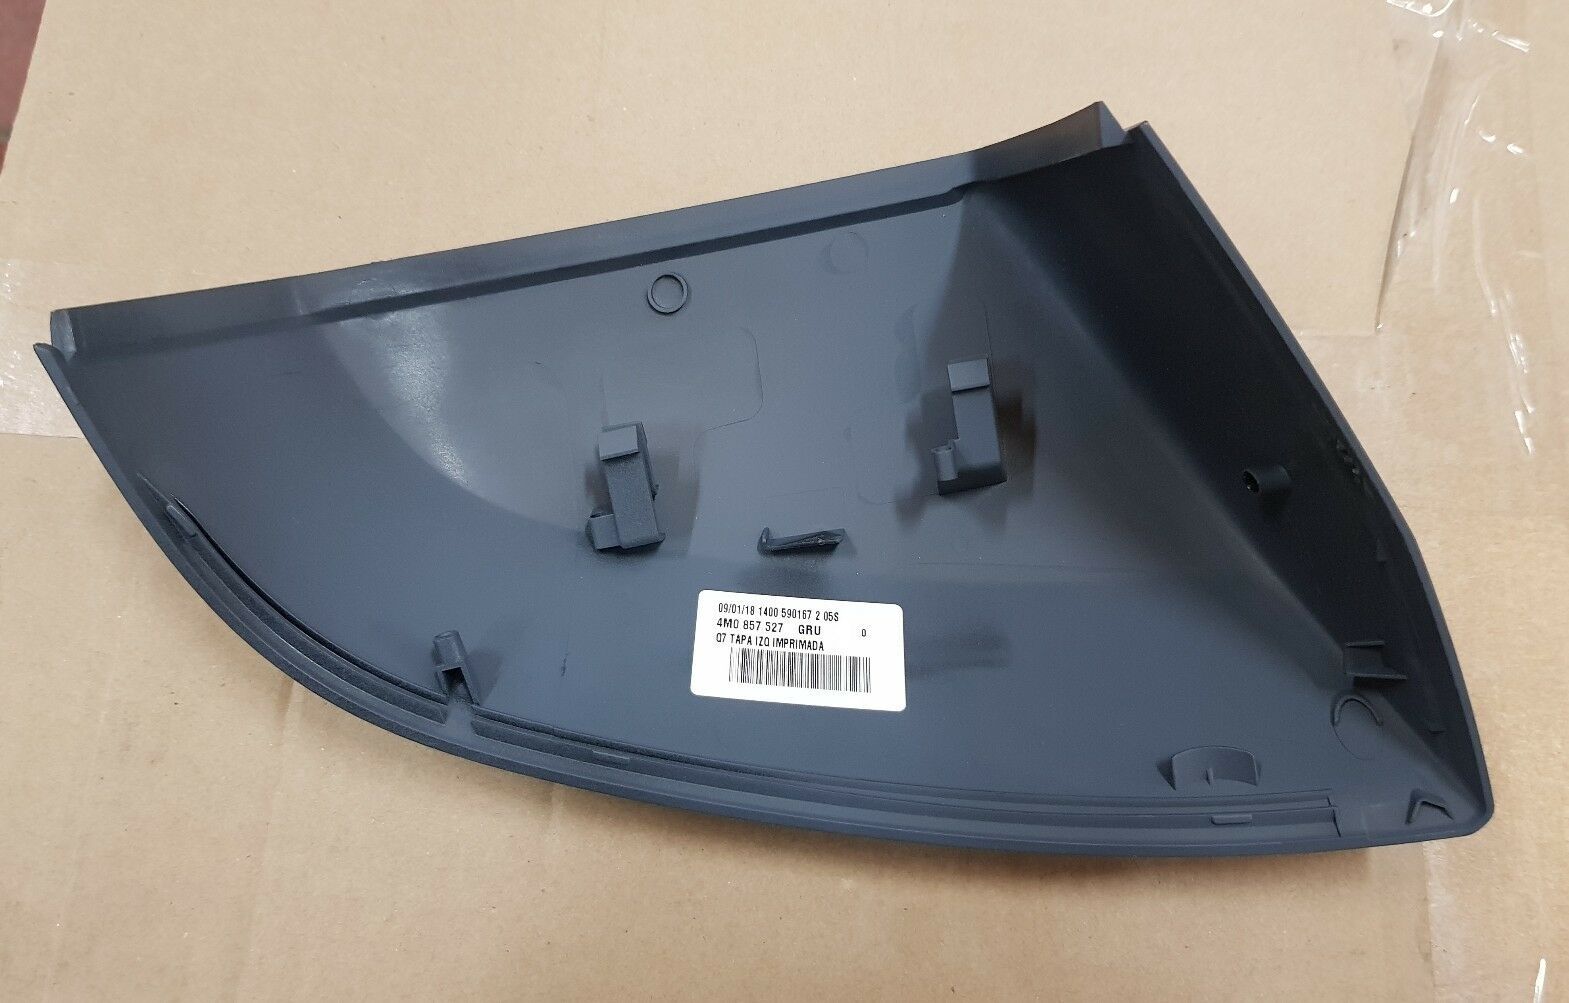 MIRROR COVER FIT FOR 2019 AUDI Q5,4M0857527 4M0857528  